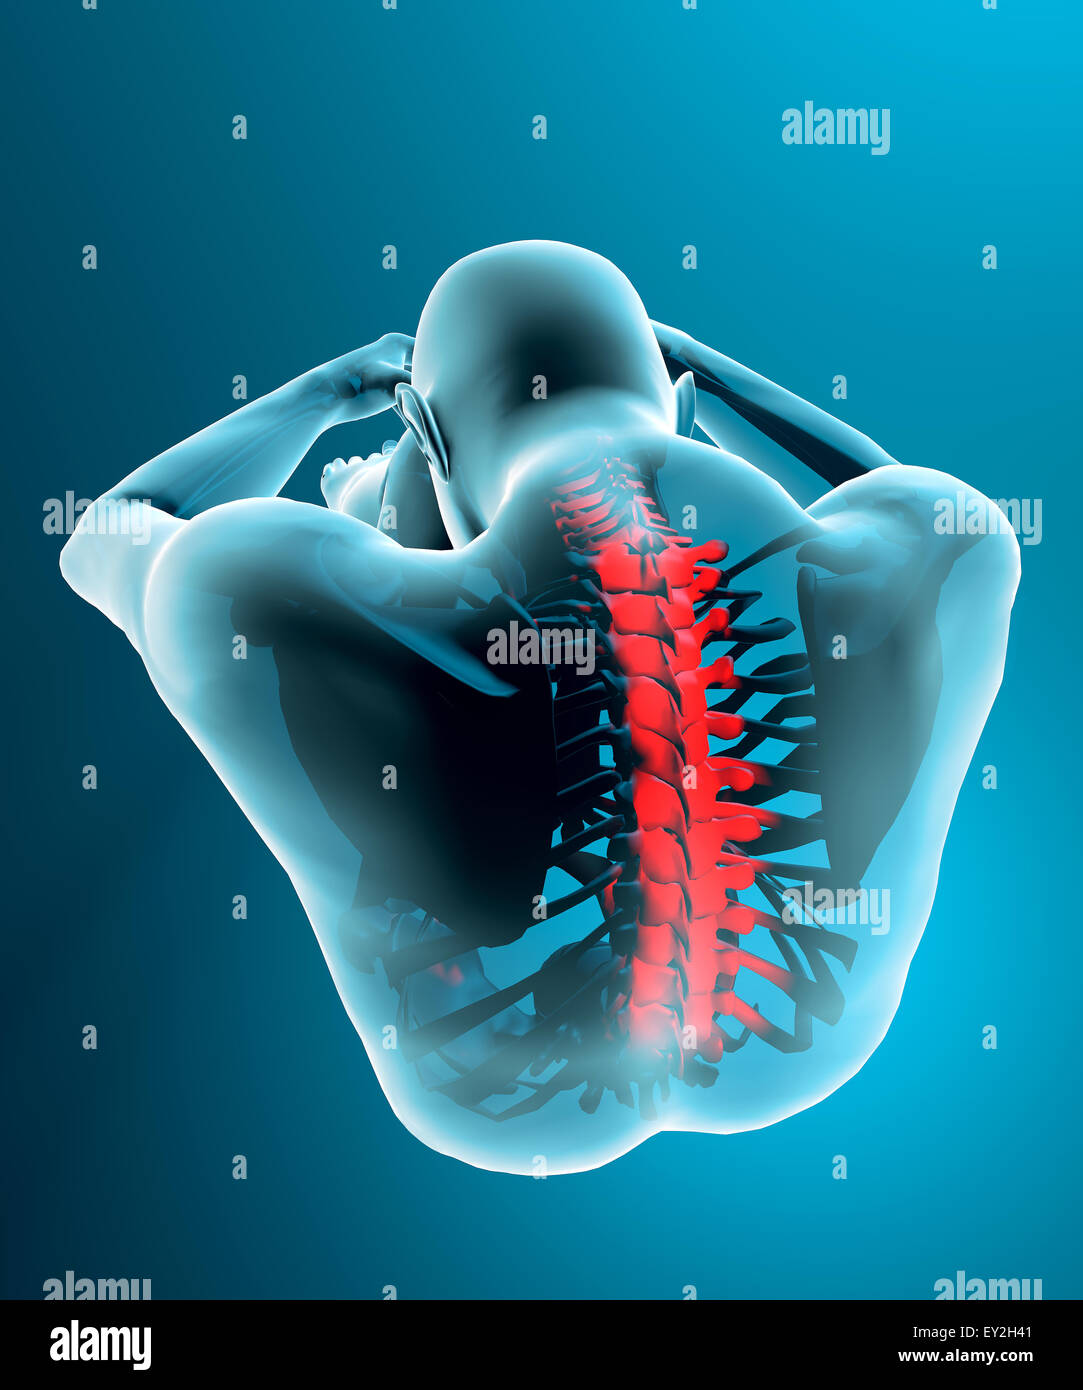 Human body seen from behind with a x-ray view of the spine Stock Photo